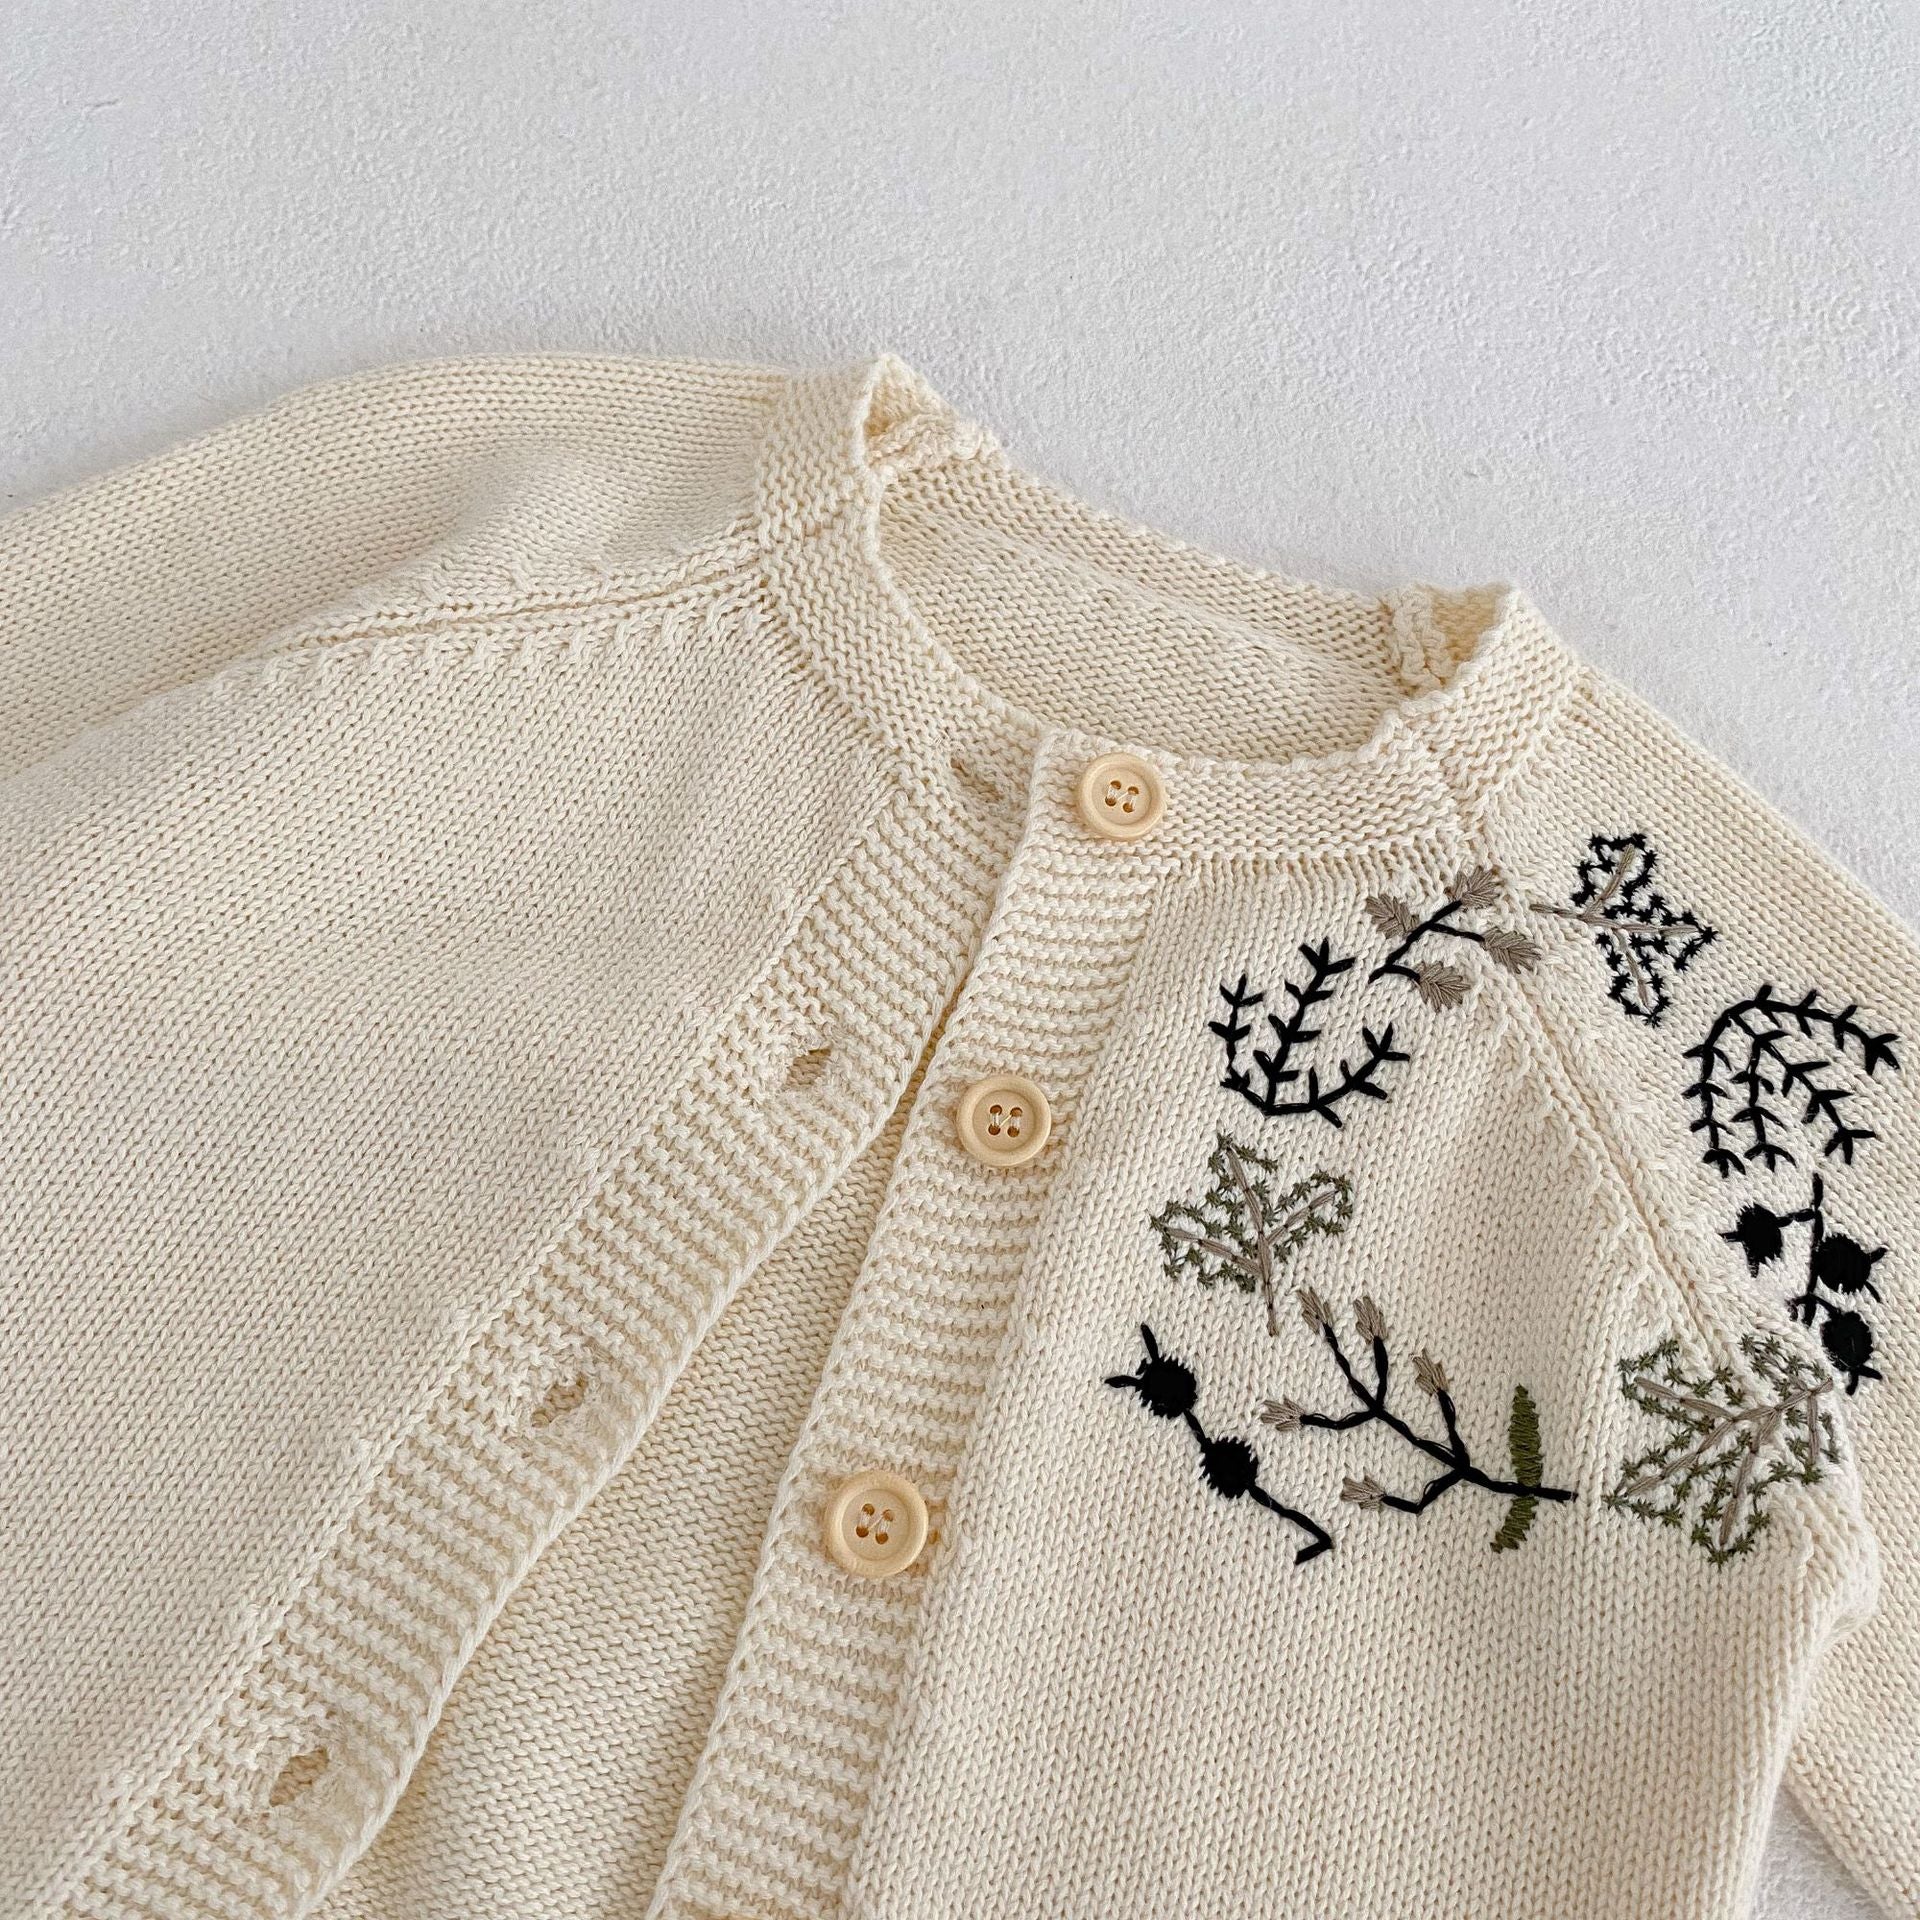 Embroidered wreath design cardigan/overalls [N3013]